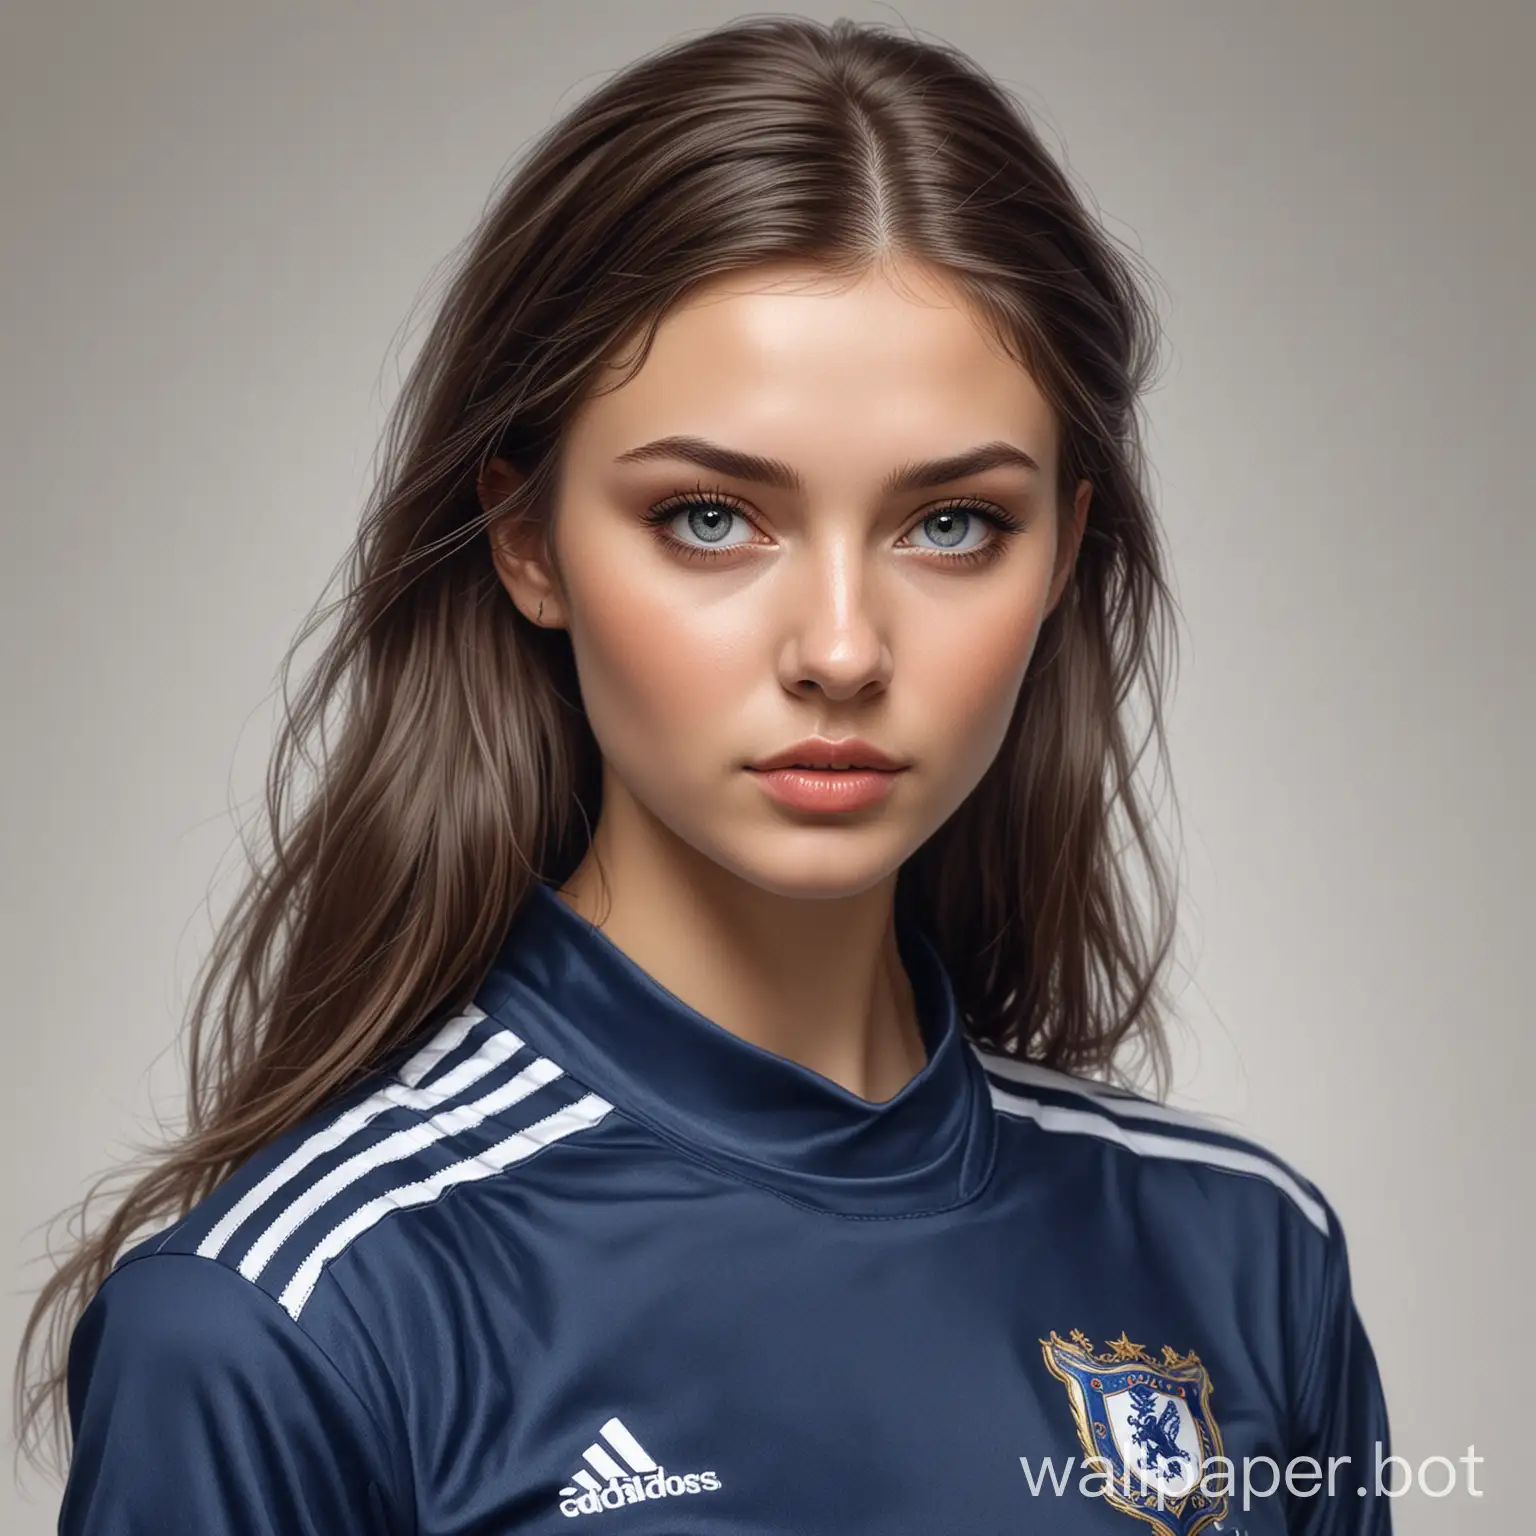 Sketch  beauty   Anna Romanova   22 years old dark hair 4th size breasts narrow waist in dark blue soccer uniform white background highly realistic masterpiece drawing with liner  portrait 16K